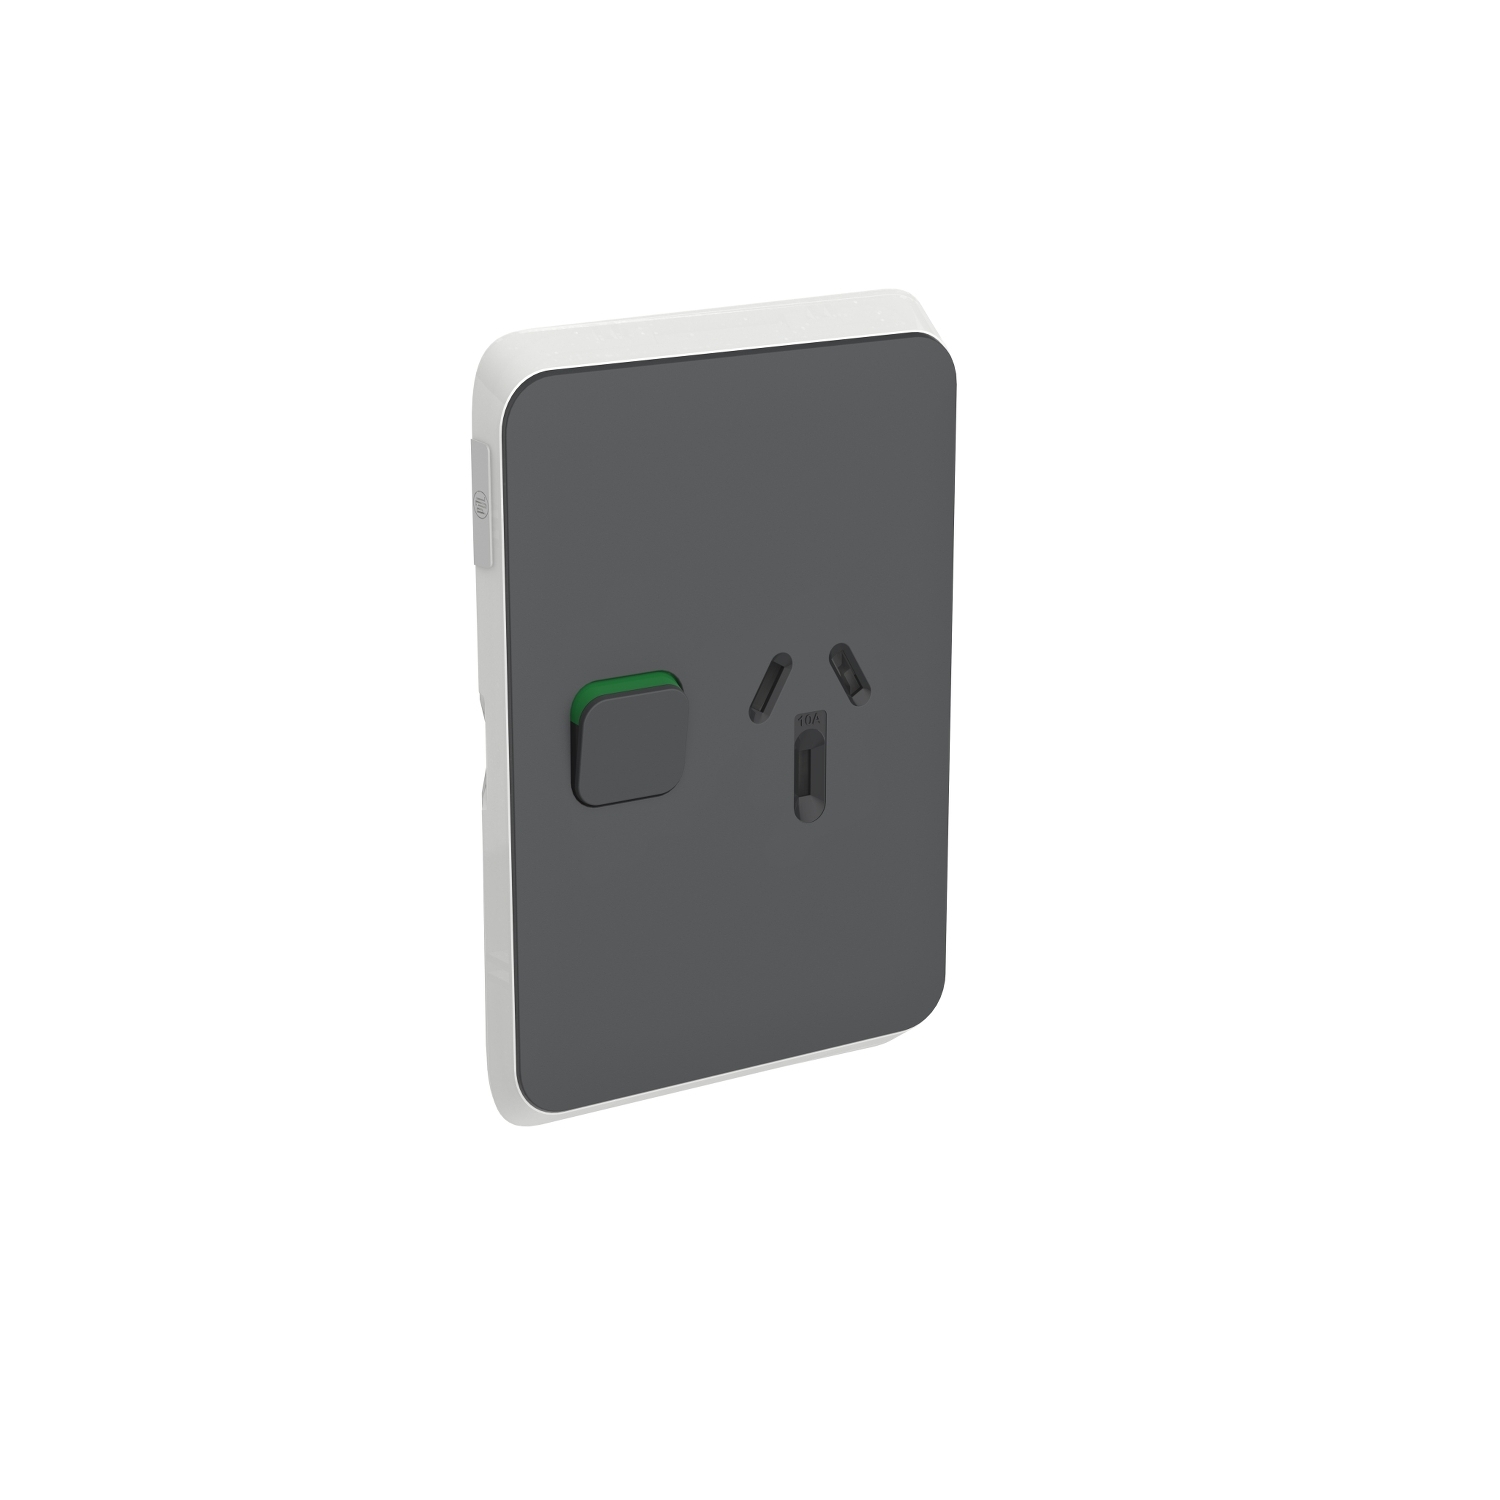 PDL Iconic, cover frame for Single switched GPO Horiz 10A 250V - Anthracite